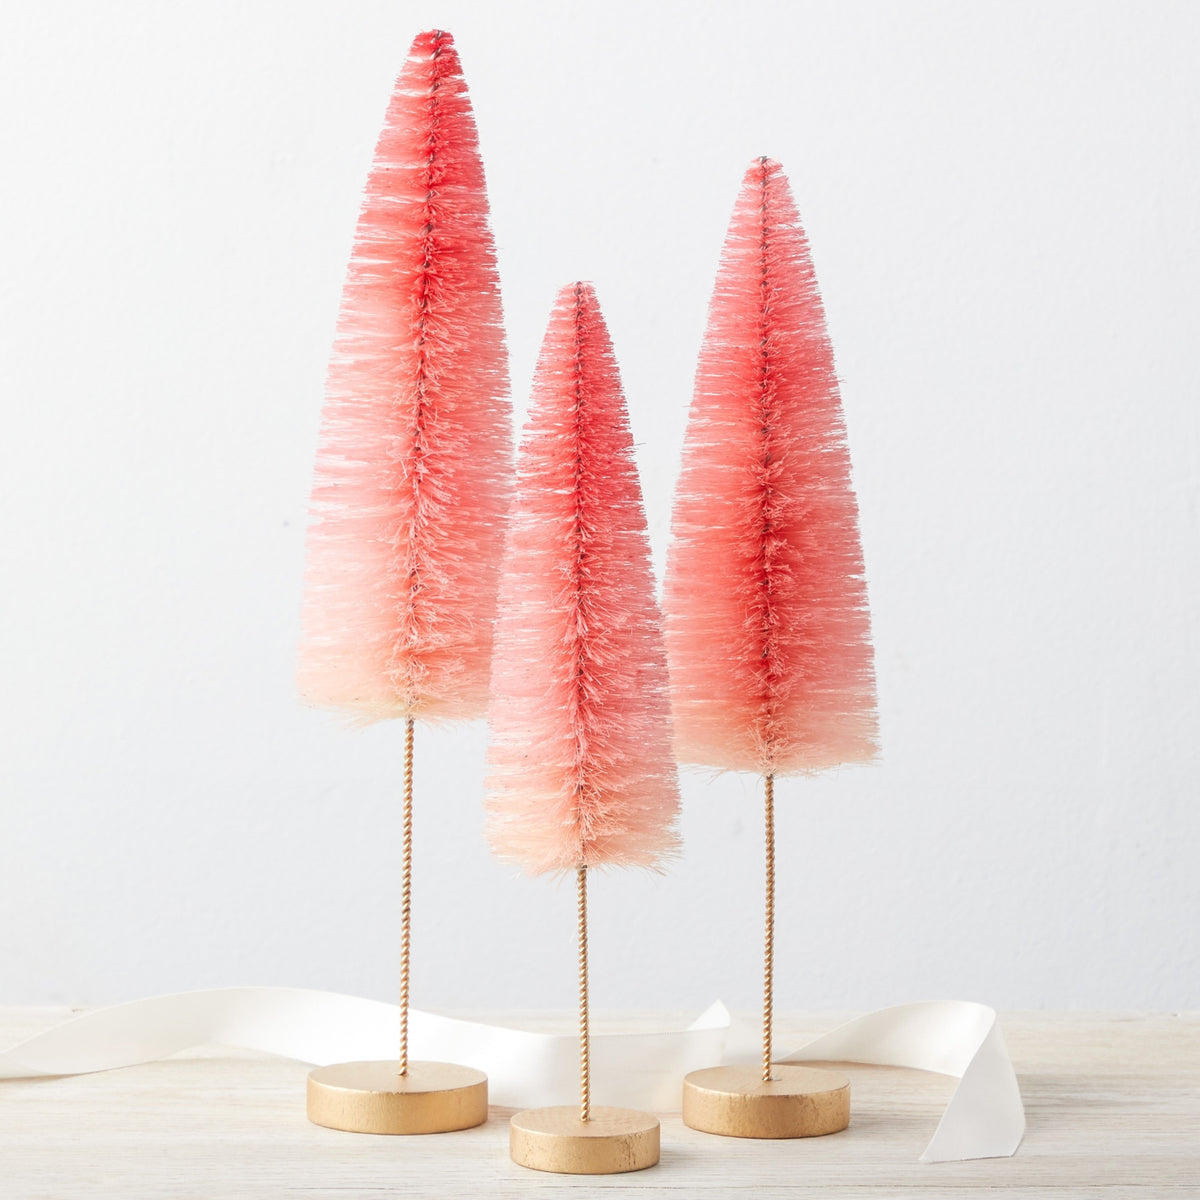 Set of 3 Pink Ombre Holiday Decor Trees